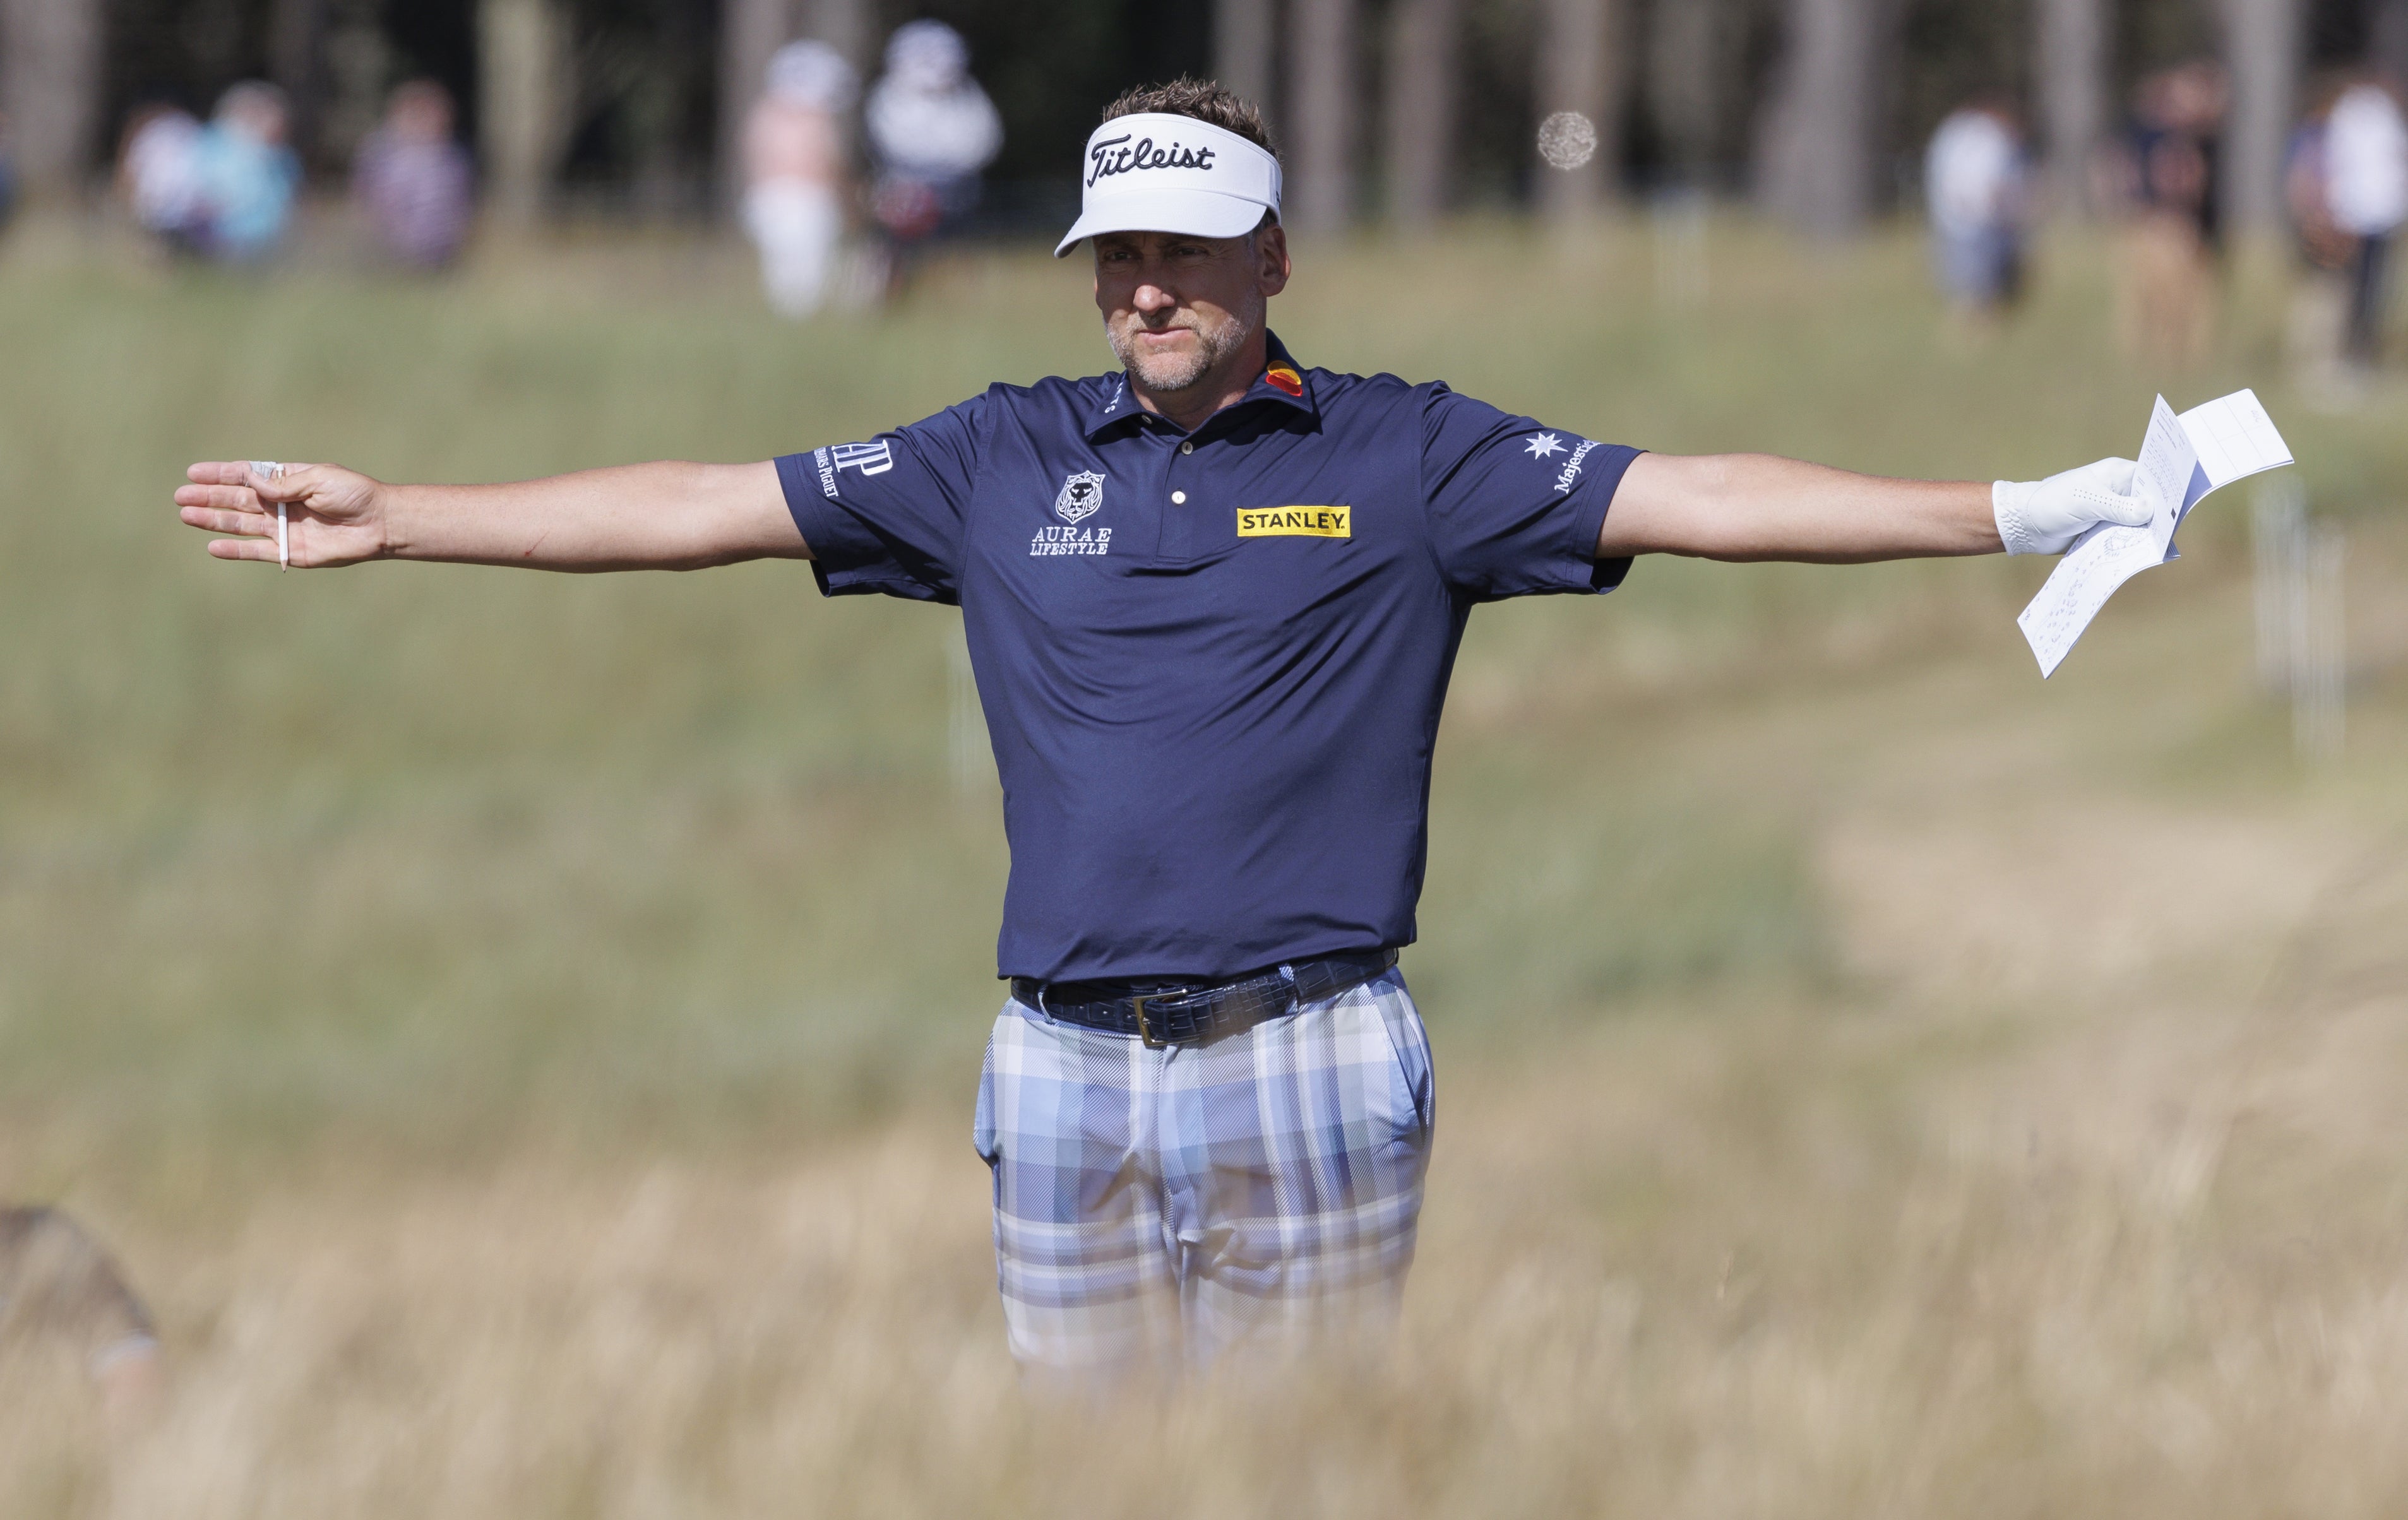 Ian Poulter will be among the LIV Golf rebels teeing it up at Wentworth